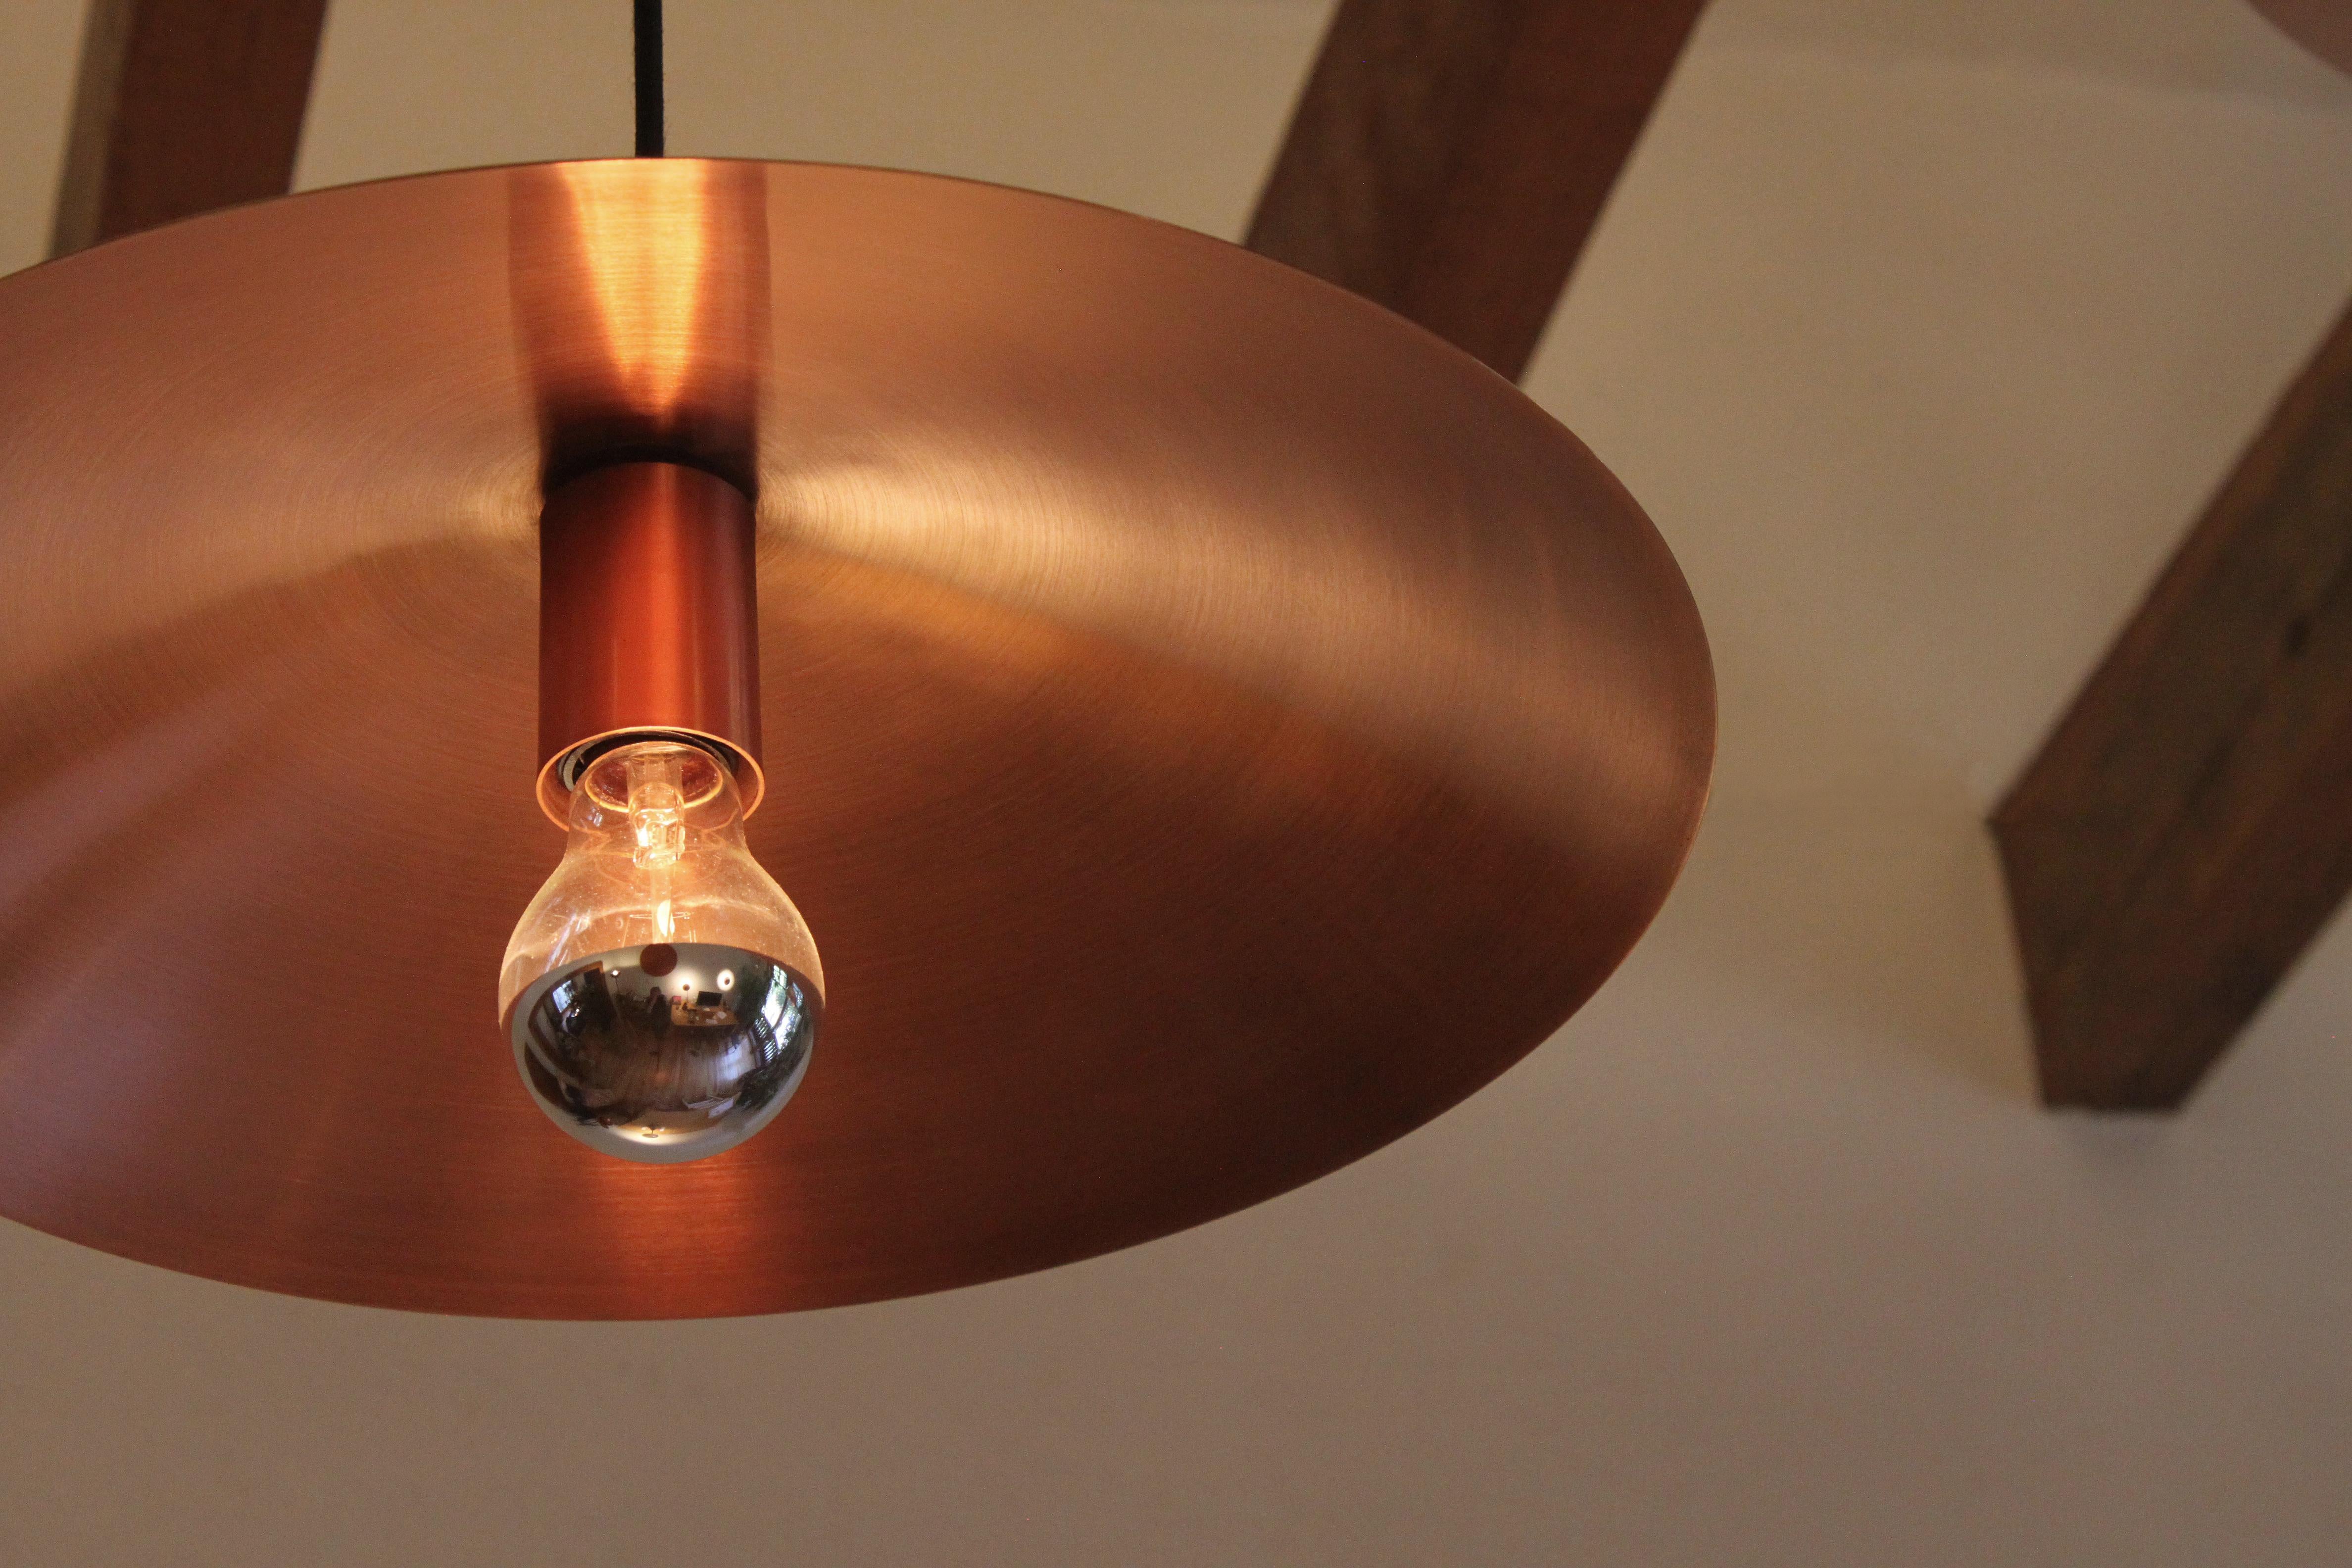 This Plato Abajo ceiling lamp is made of solid copper and oak wood with polished and antique finish, in size ø60. Matte finish. Full dimensions: ø 60 x 20 cm.

Plato Abajo pendant lamp is available in multiple dimensions and